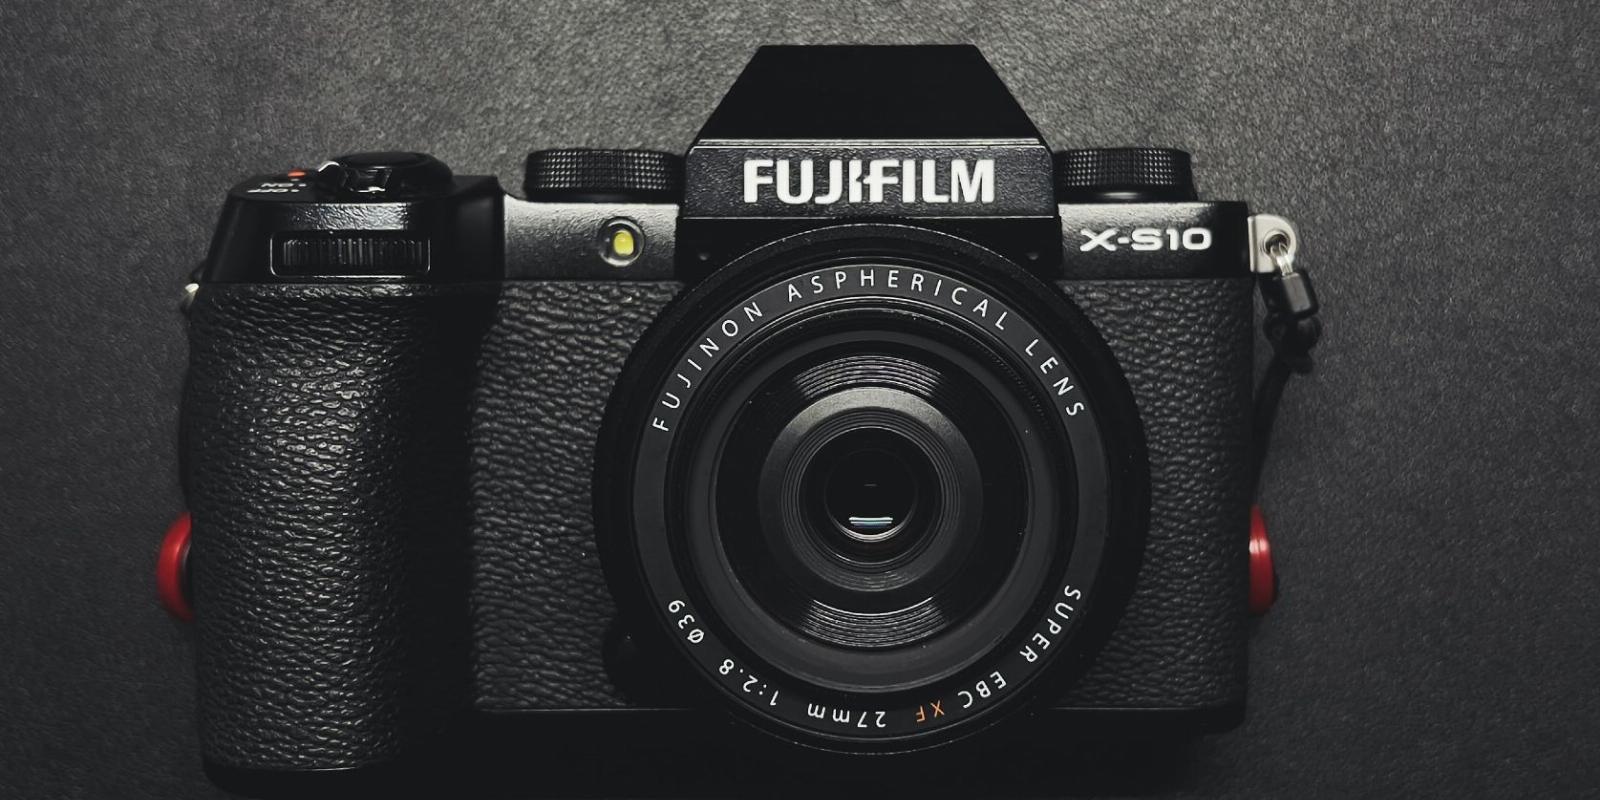 7 Reasons to Make the X-S10 Your Next Fujifilm Camera Purchase